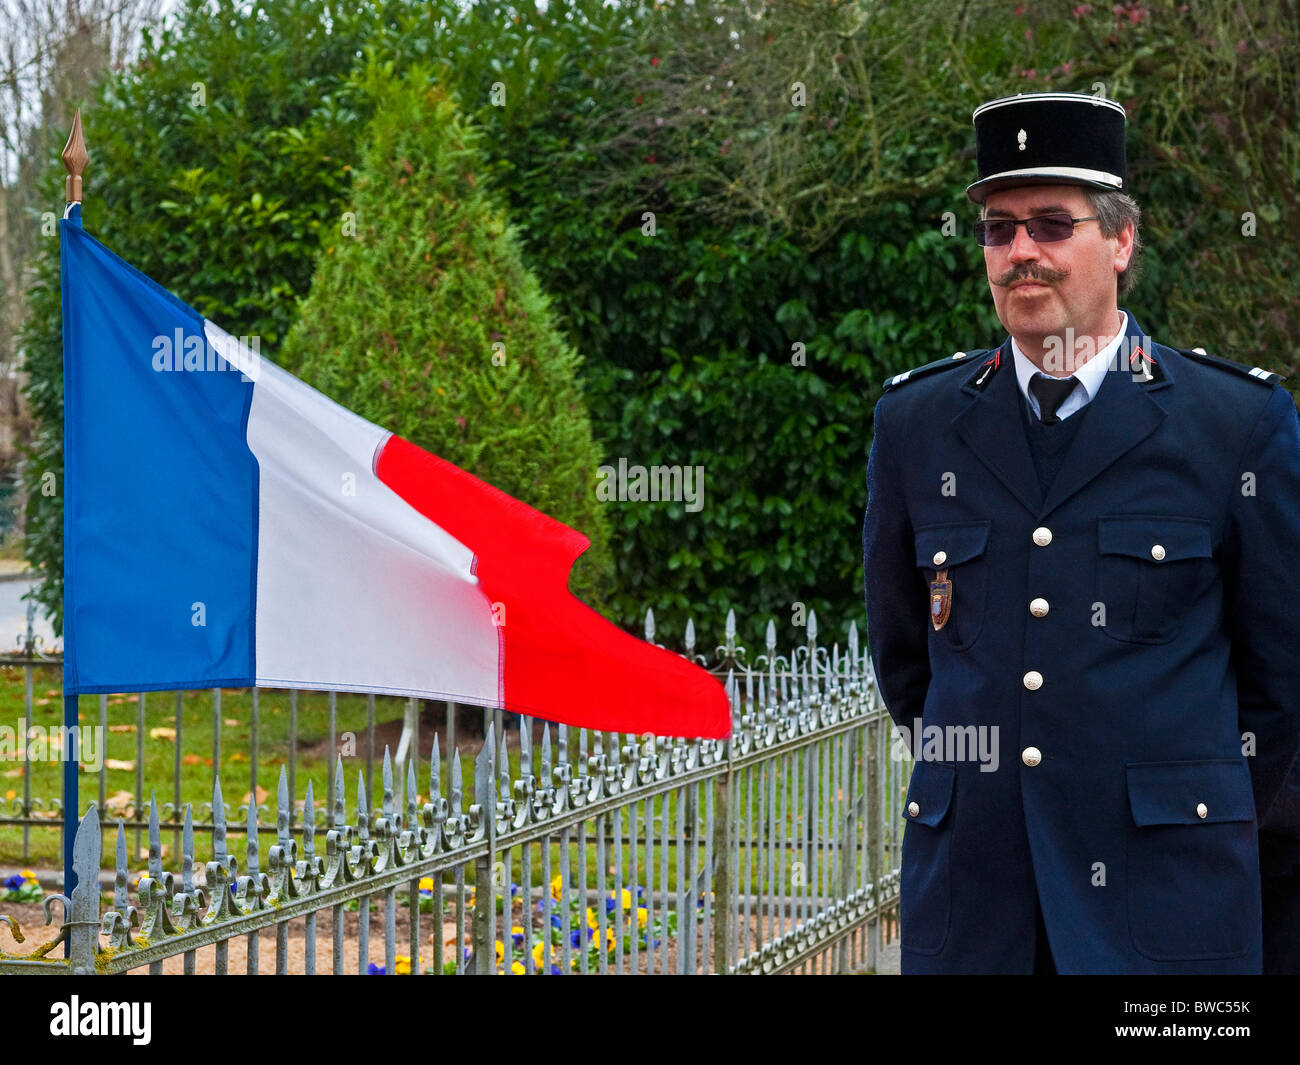 French Sapeur-pompier / fireman in dress uniform at Remembrance Day parade  - France Stock Photo - Alamy